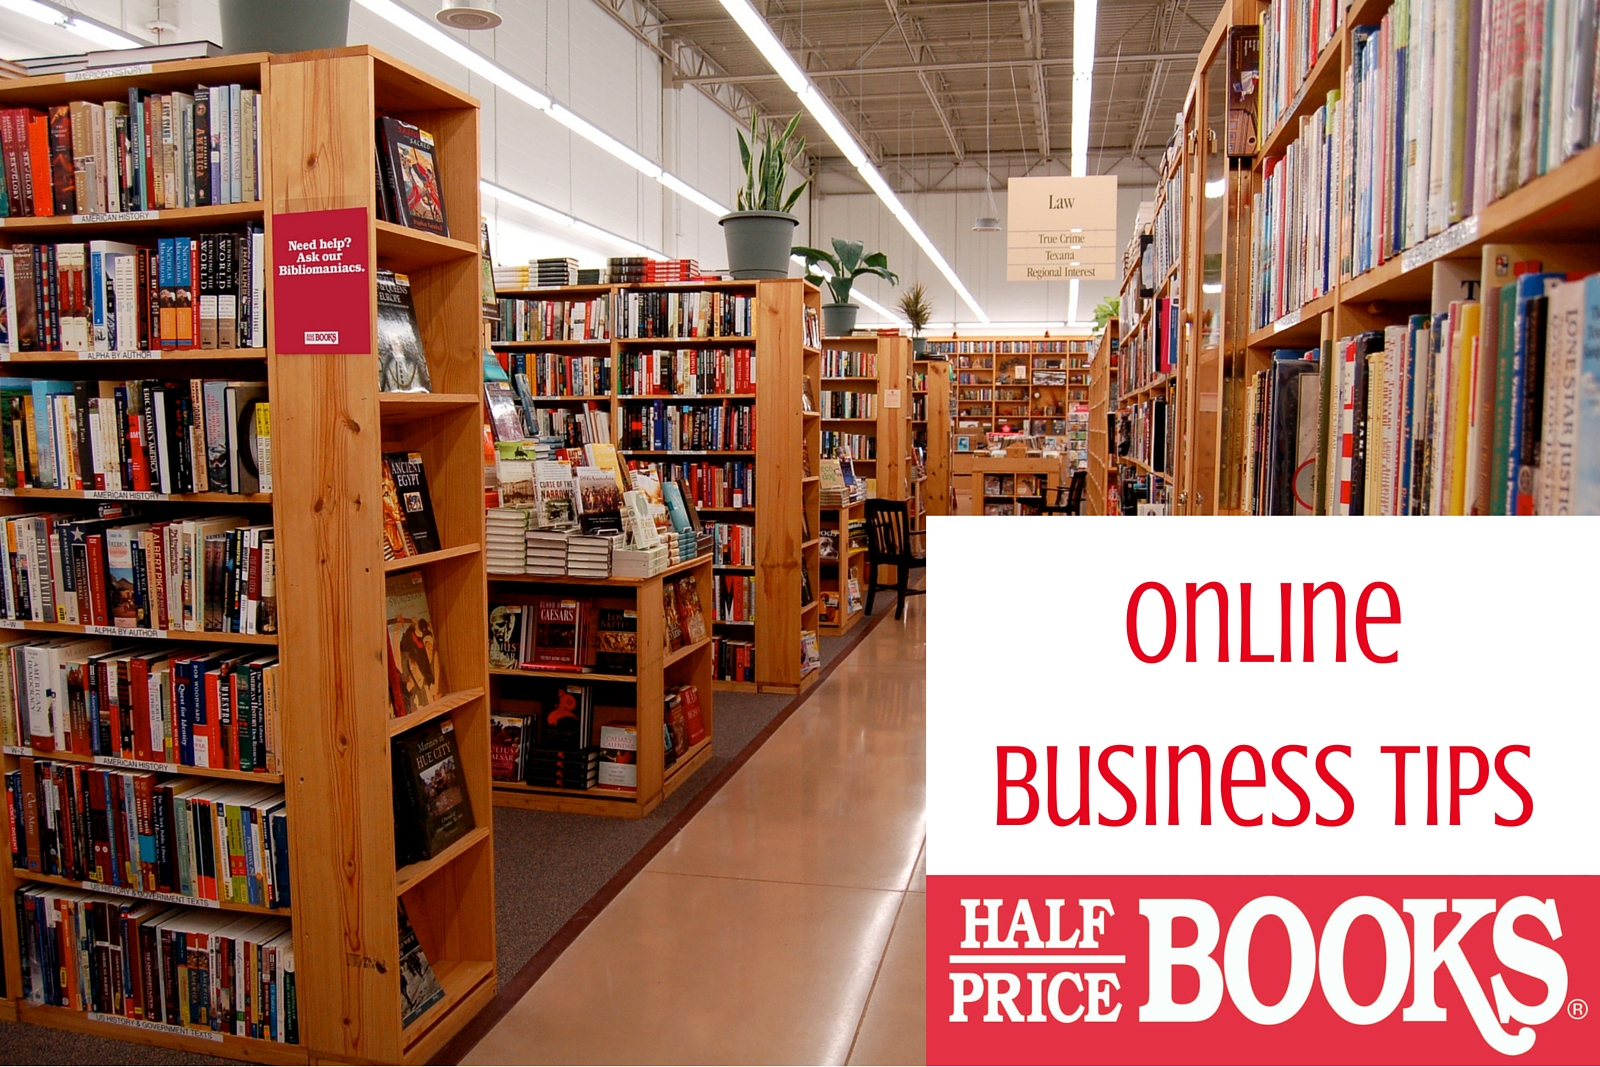 Half Price Books: A Tale of a Successful Small Online Business - Online ...